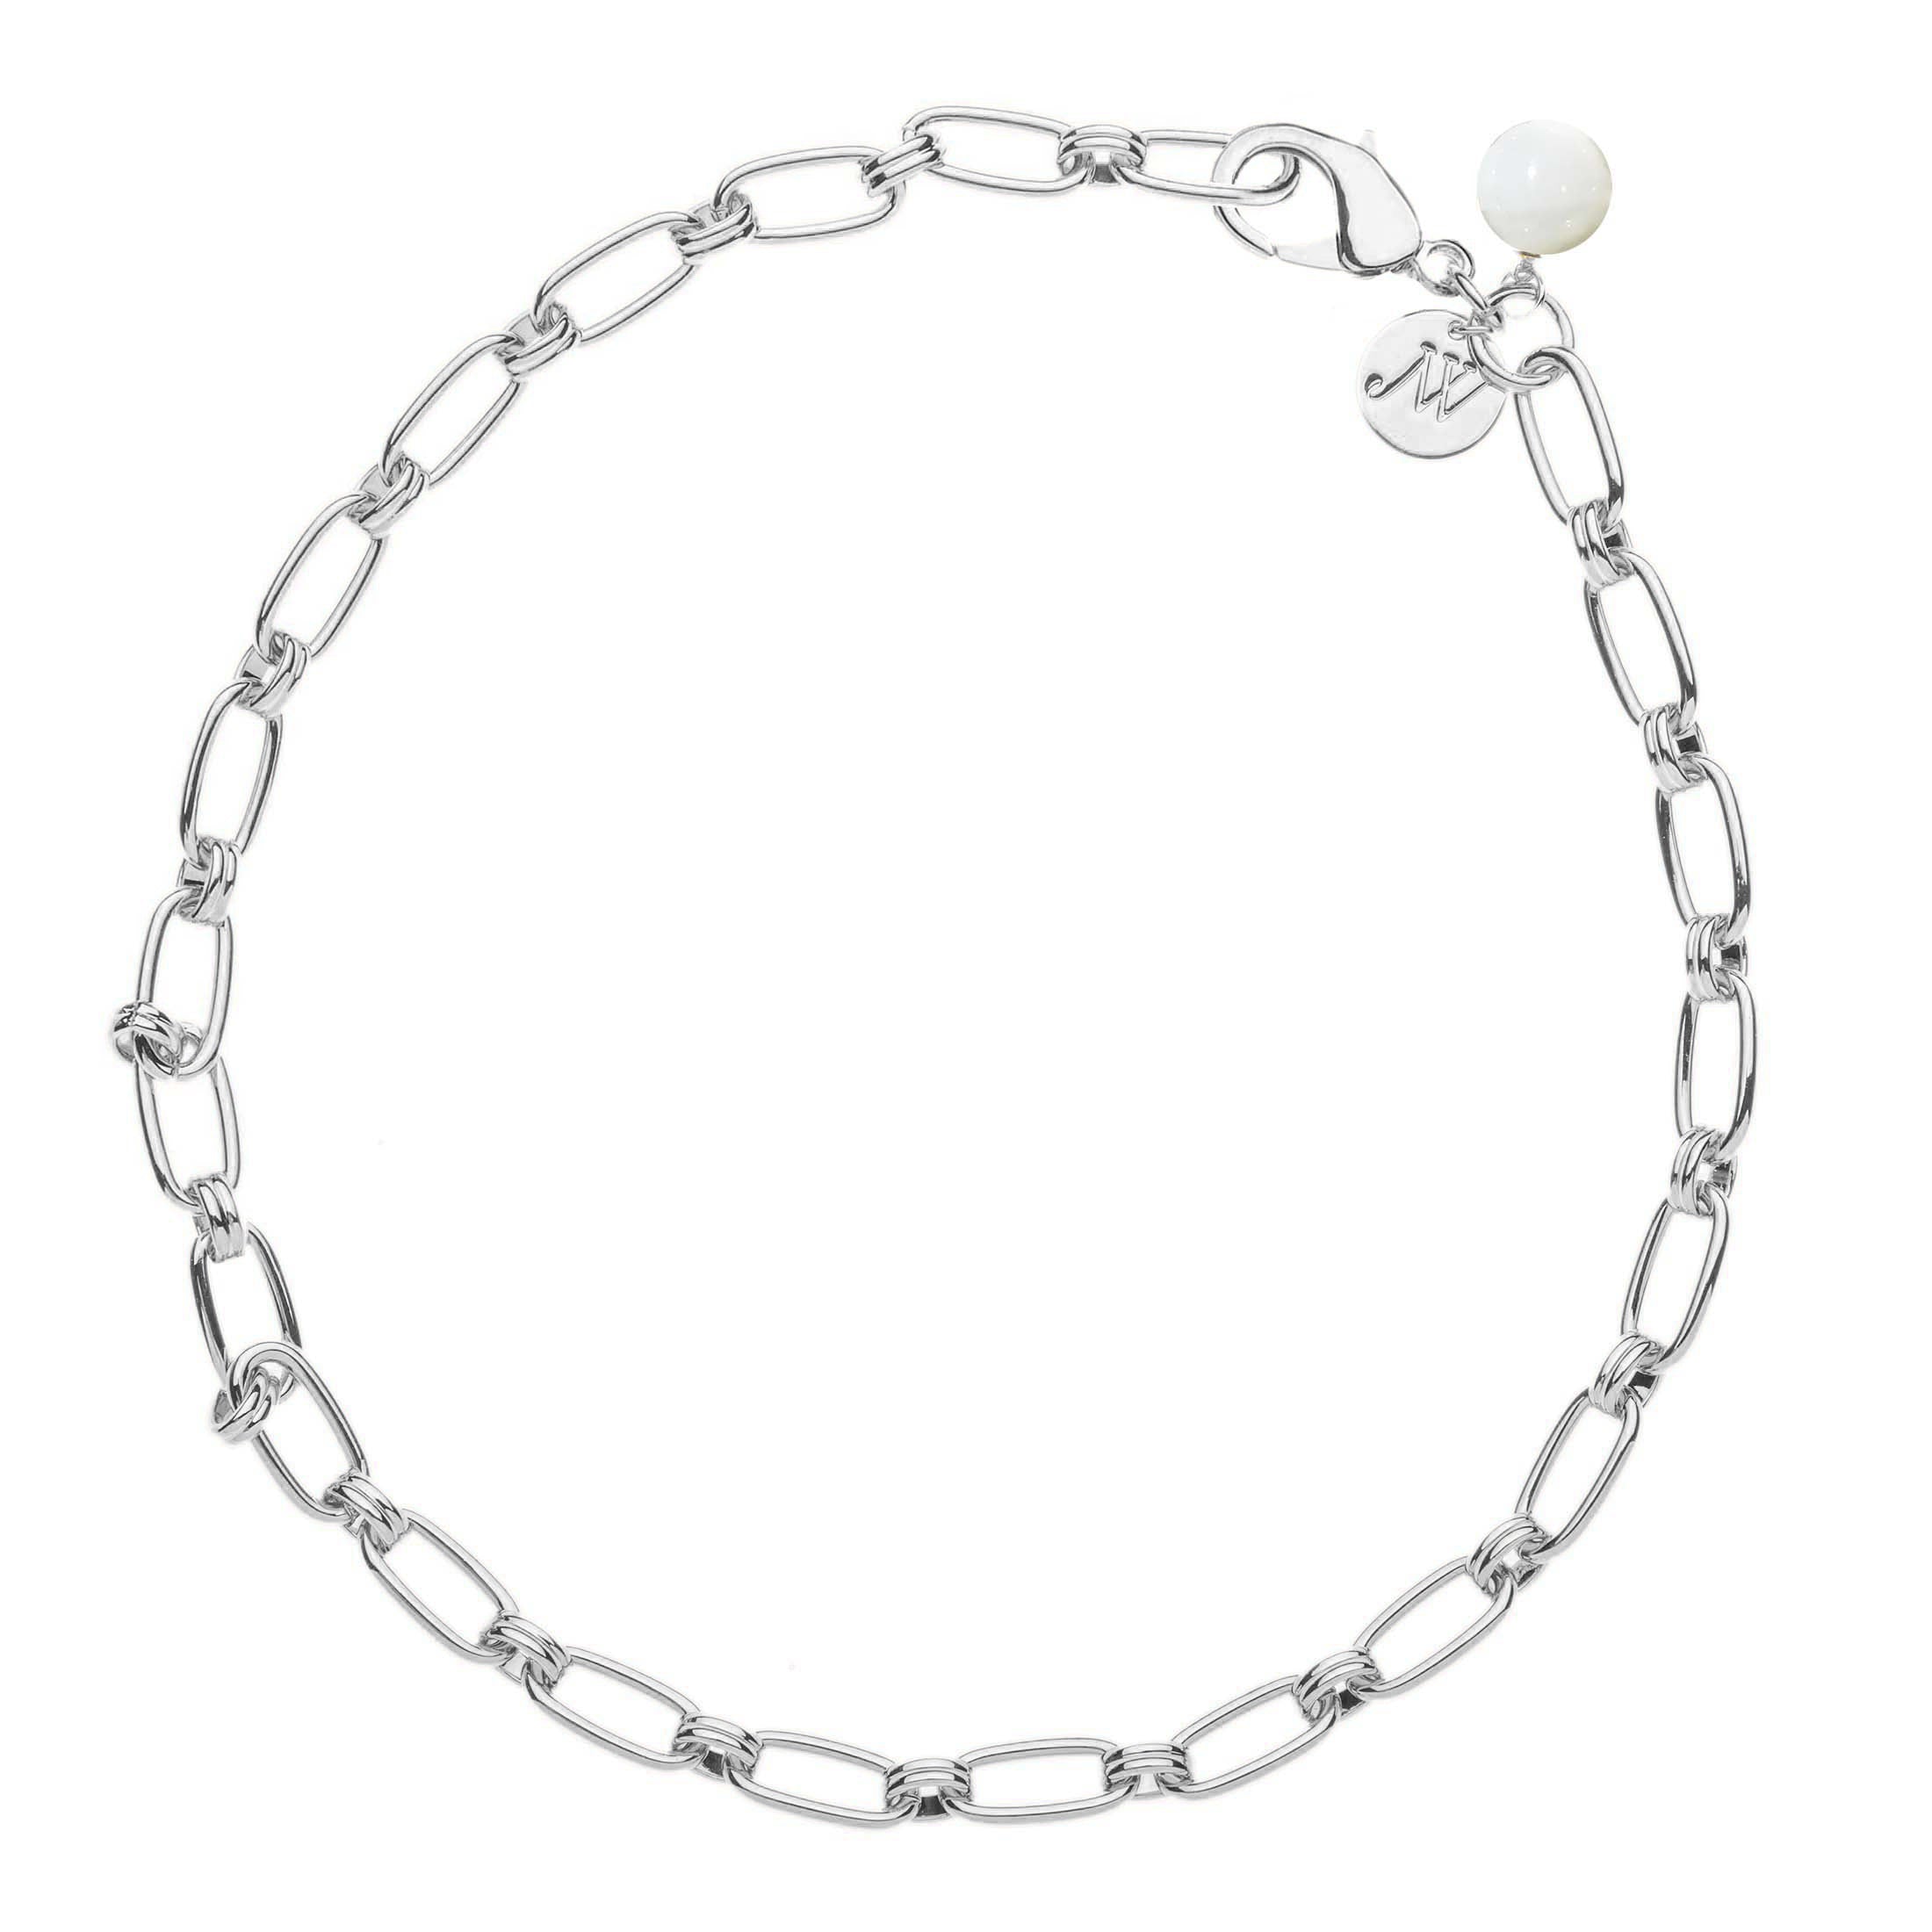 Jane Win Wheels of Fortune Chain with Mother of Pearl Bead